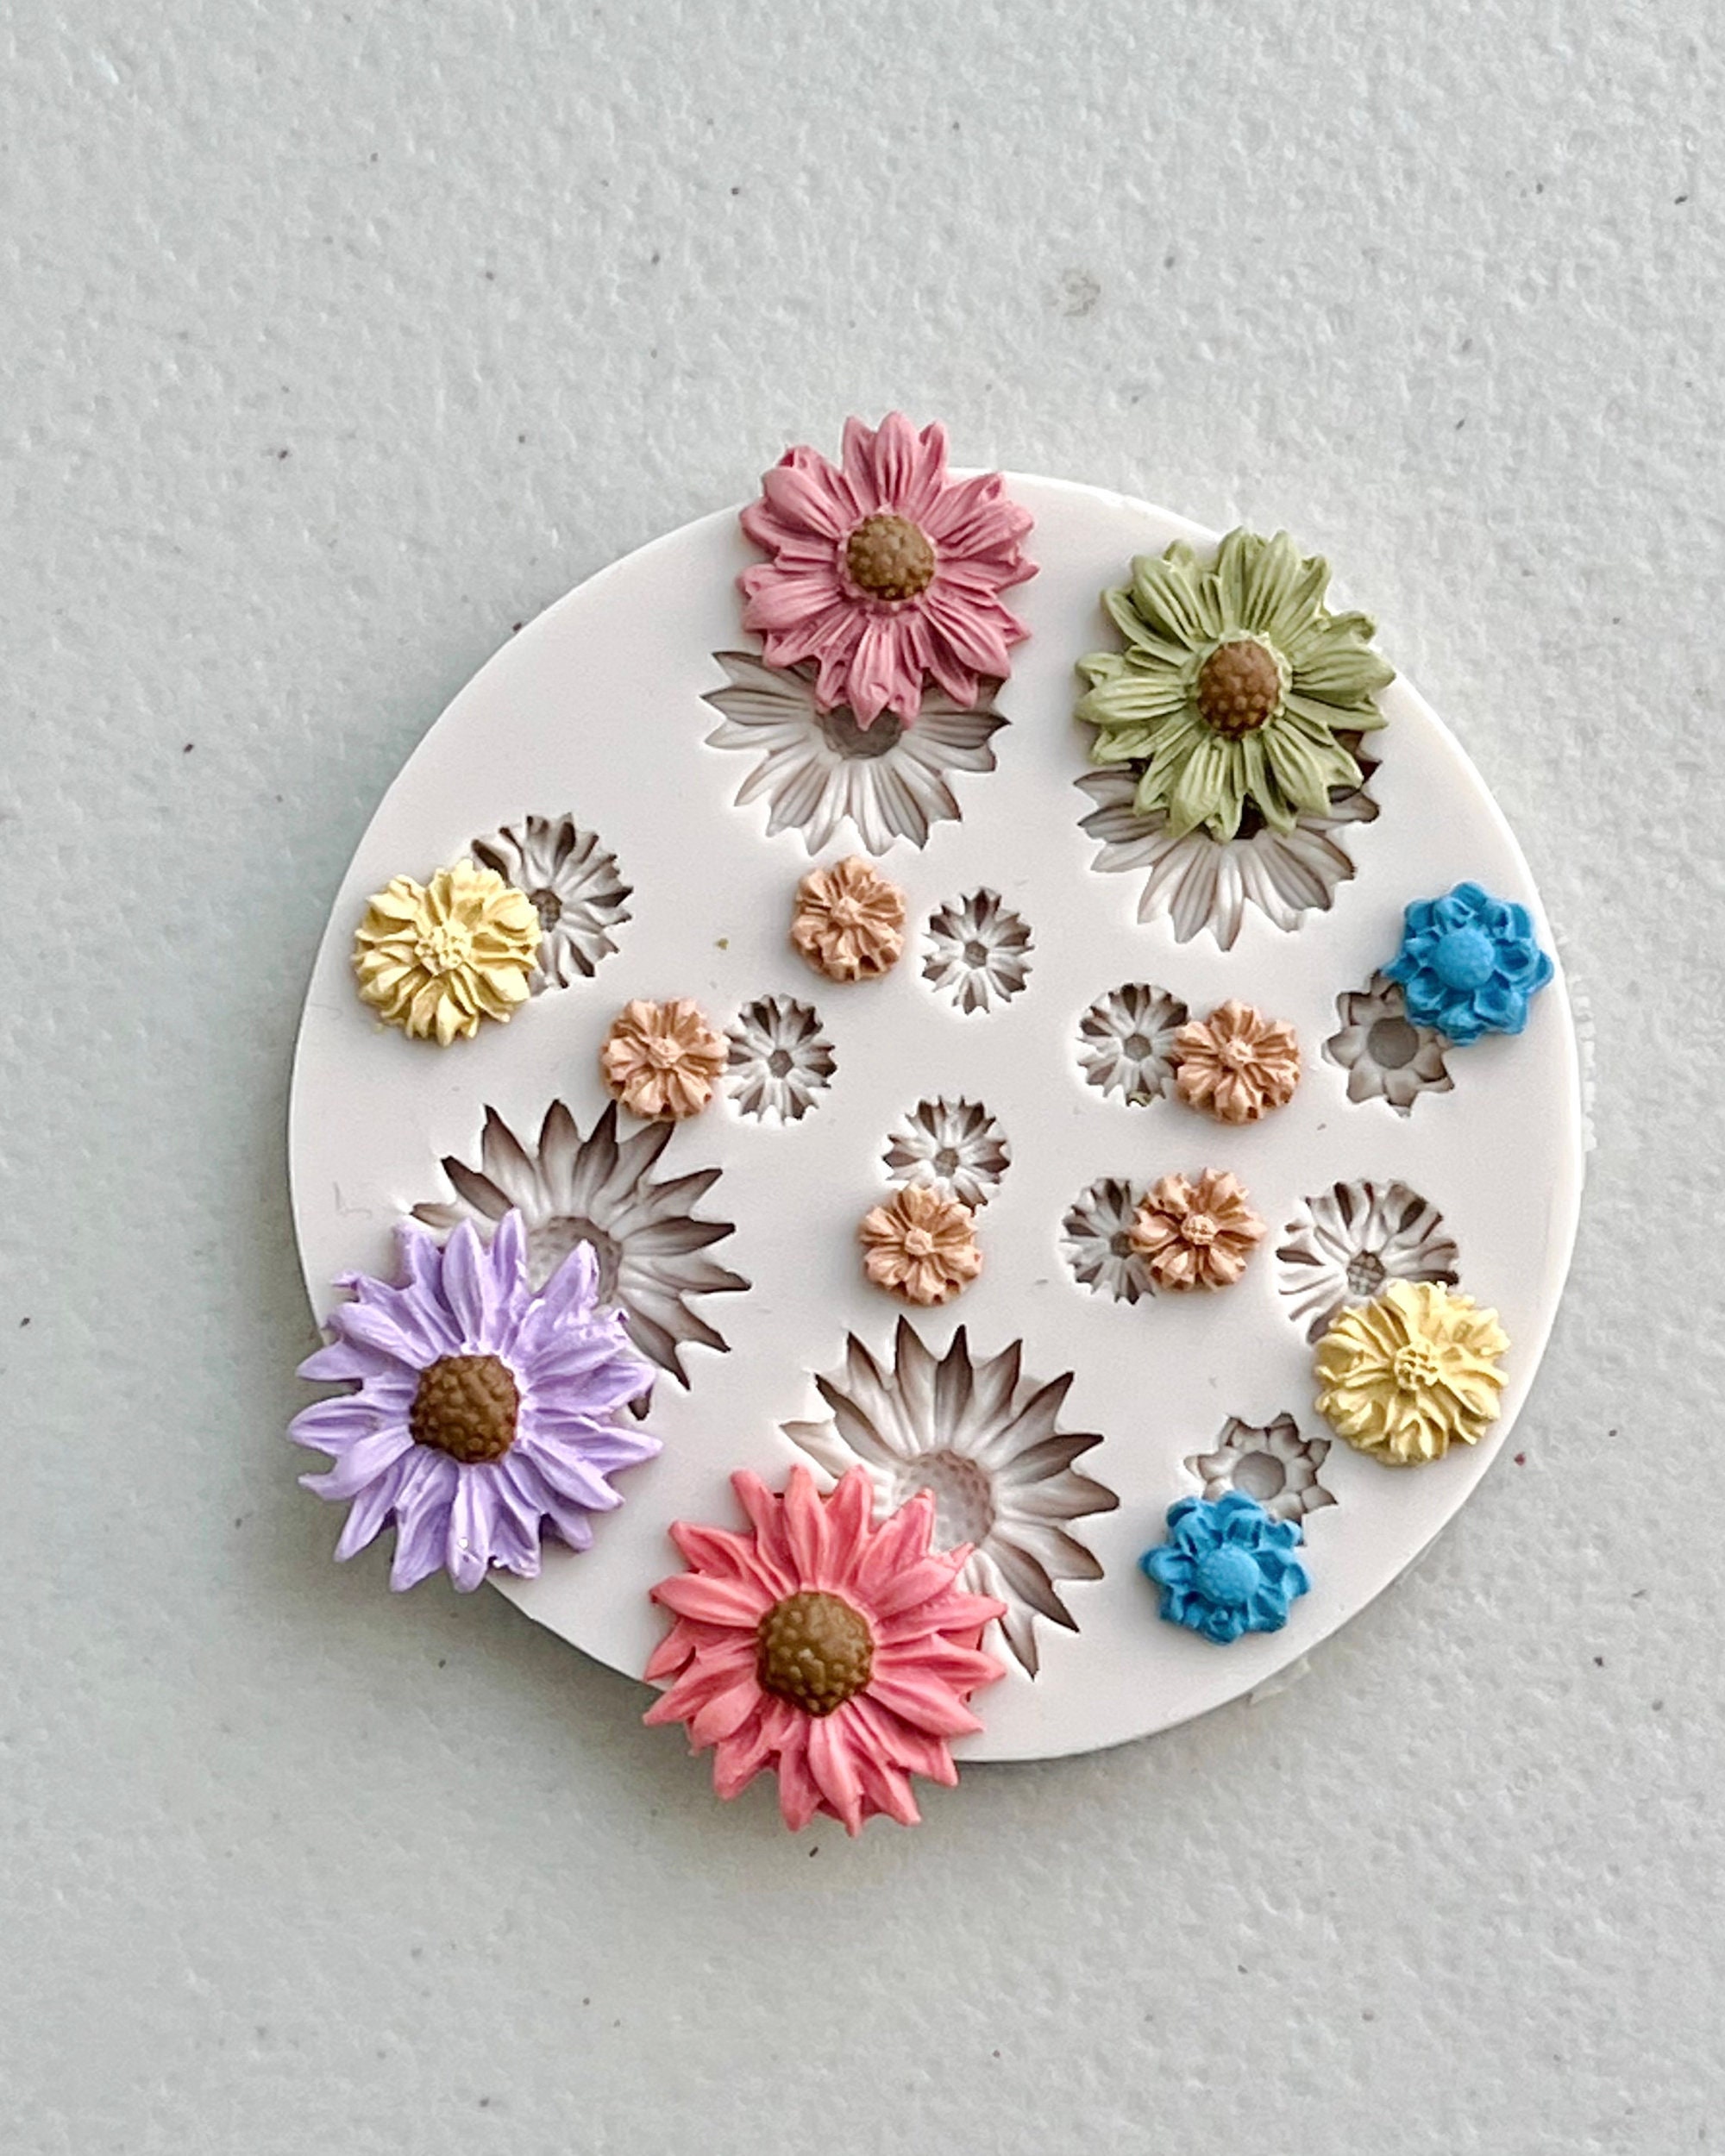 6PCS Flower Polymer Clay Molds,Rich in Style Clay Cutters for Polymer Clay  Jewelry,Mini Silicone Flower molds for Crafts,Earrings Jewelry,DIY Making